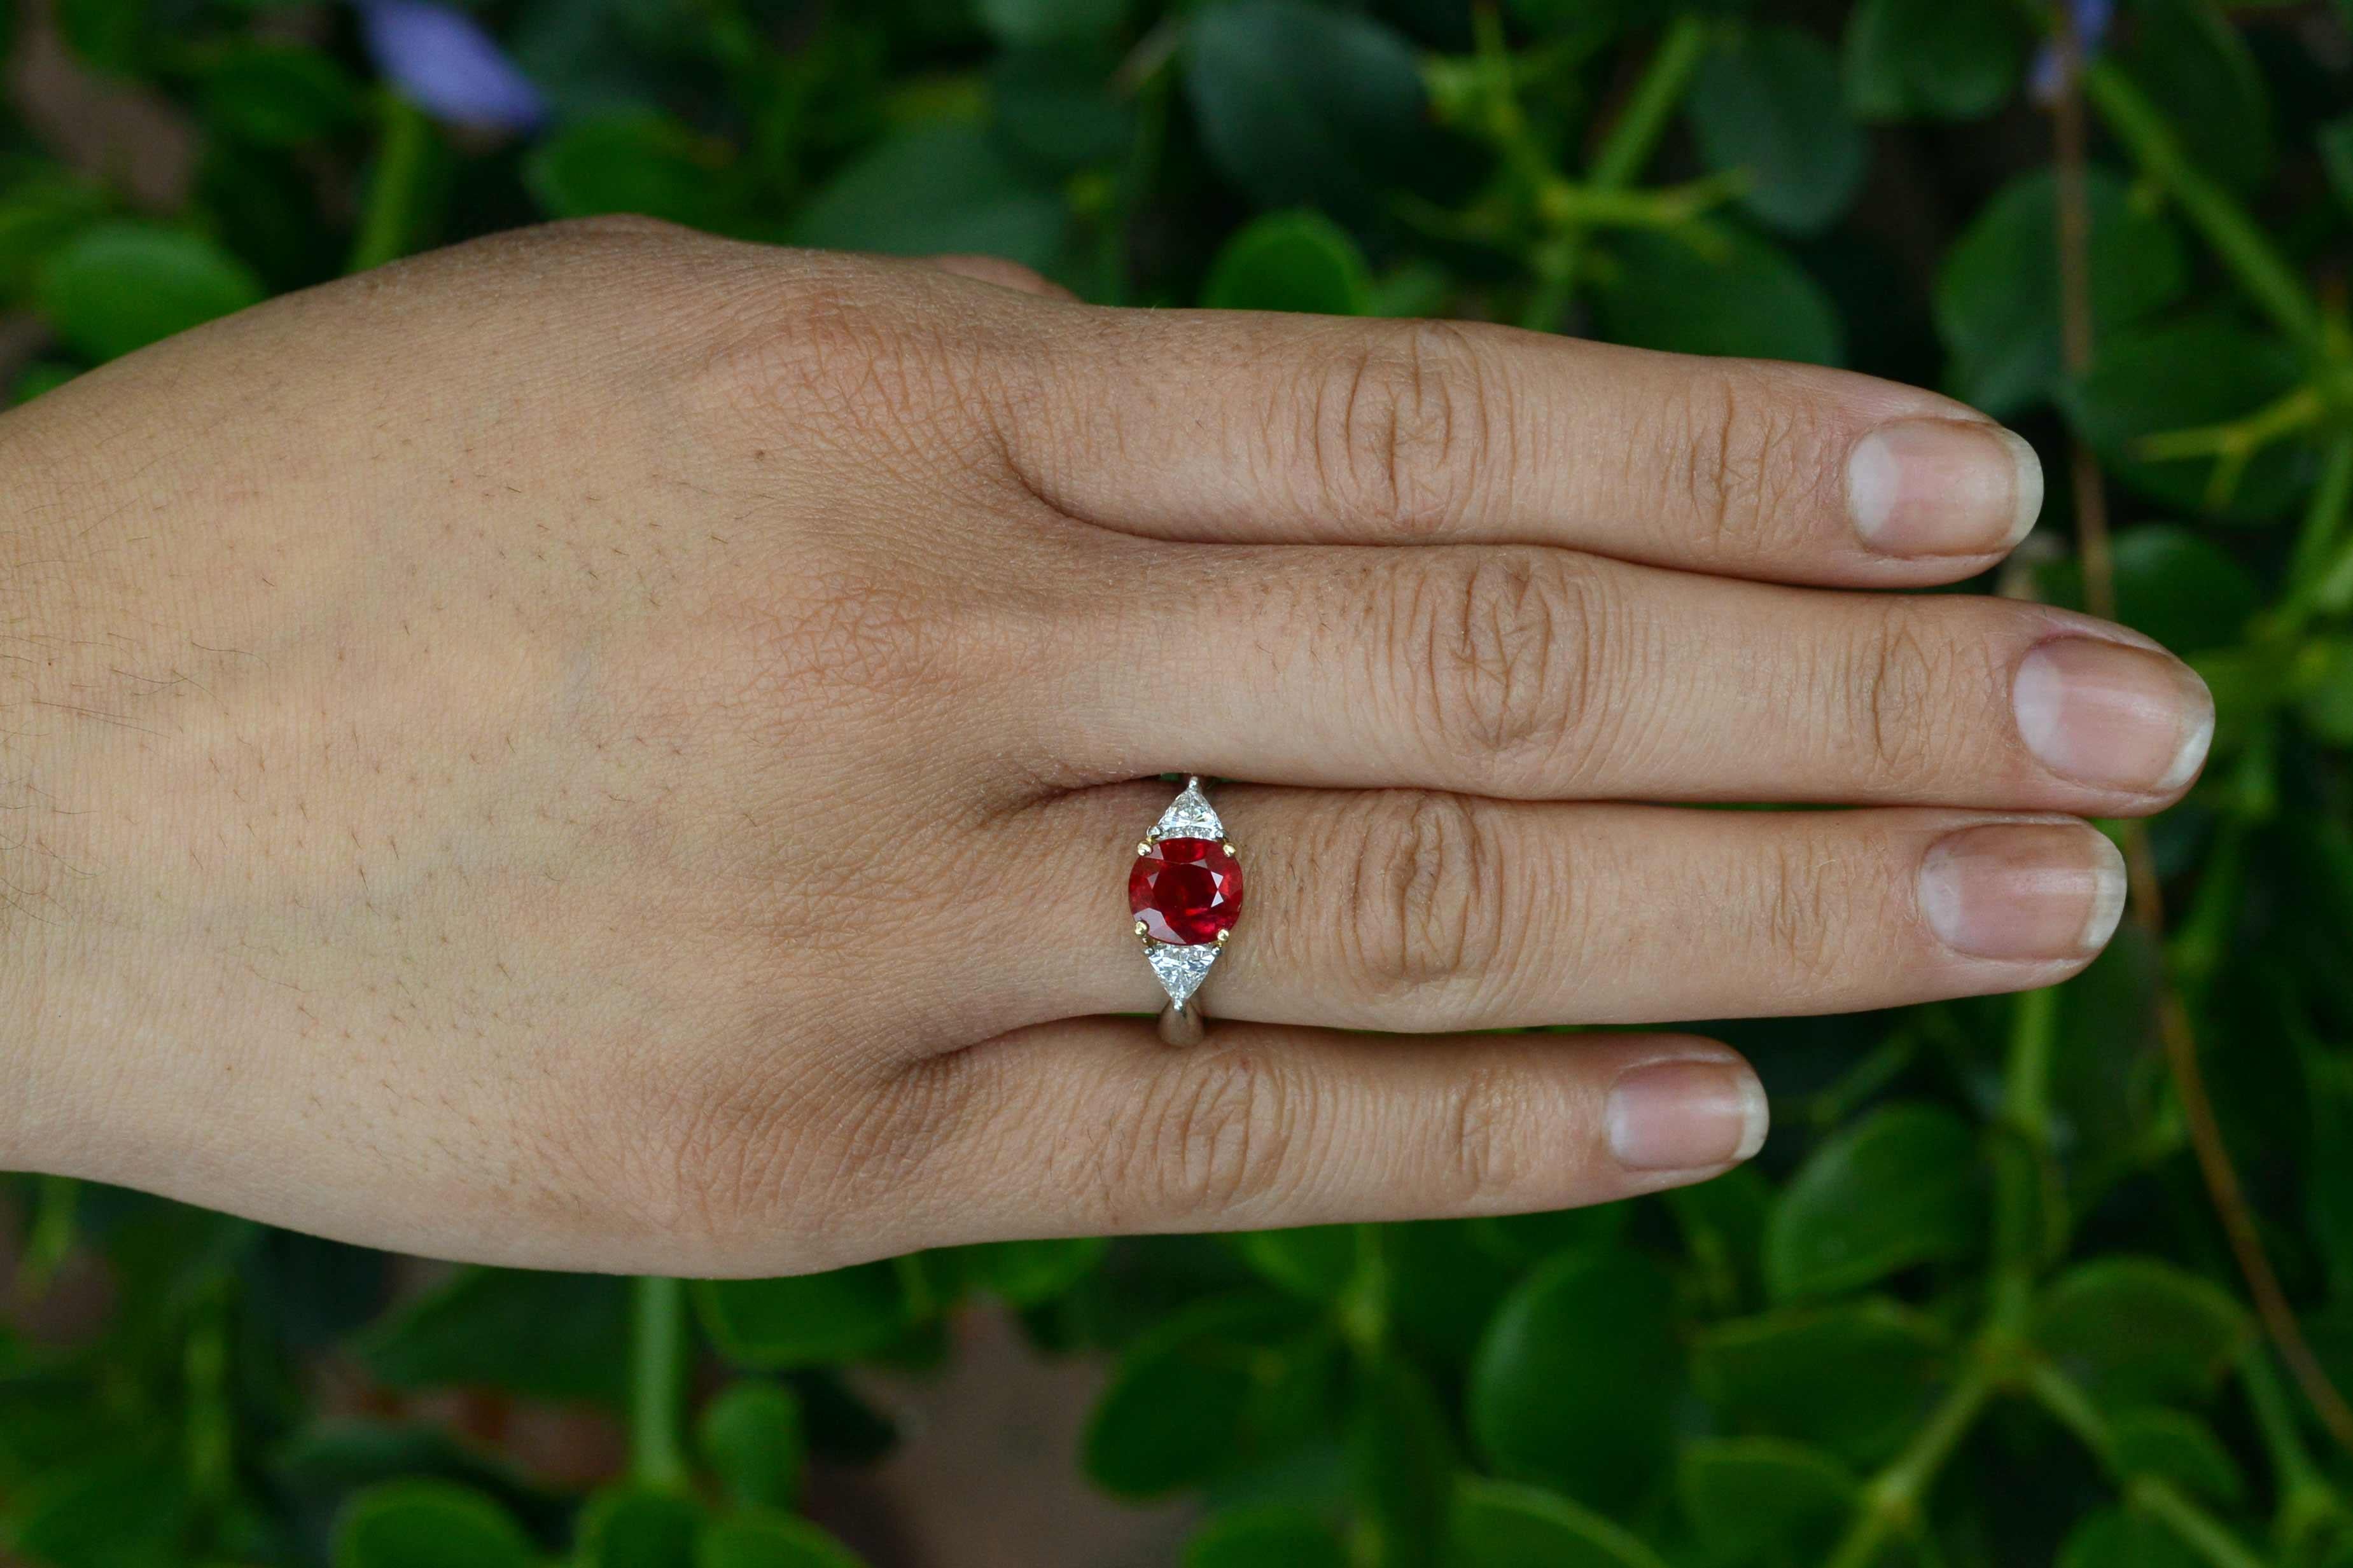 Boasting a rare, 3 carat GIA certified Pigeon Blood Red Burma Ruby commands center stage, accompanied by a pair of fiery, sparkling triangle diamonds, this 3 stone stunner is a real show-stopper. The vivid color of Burmese rubies is prized among